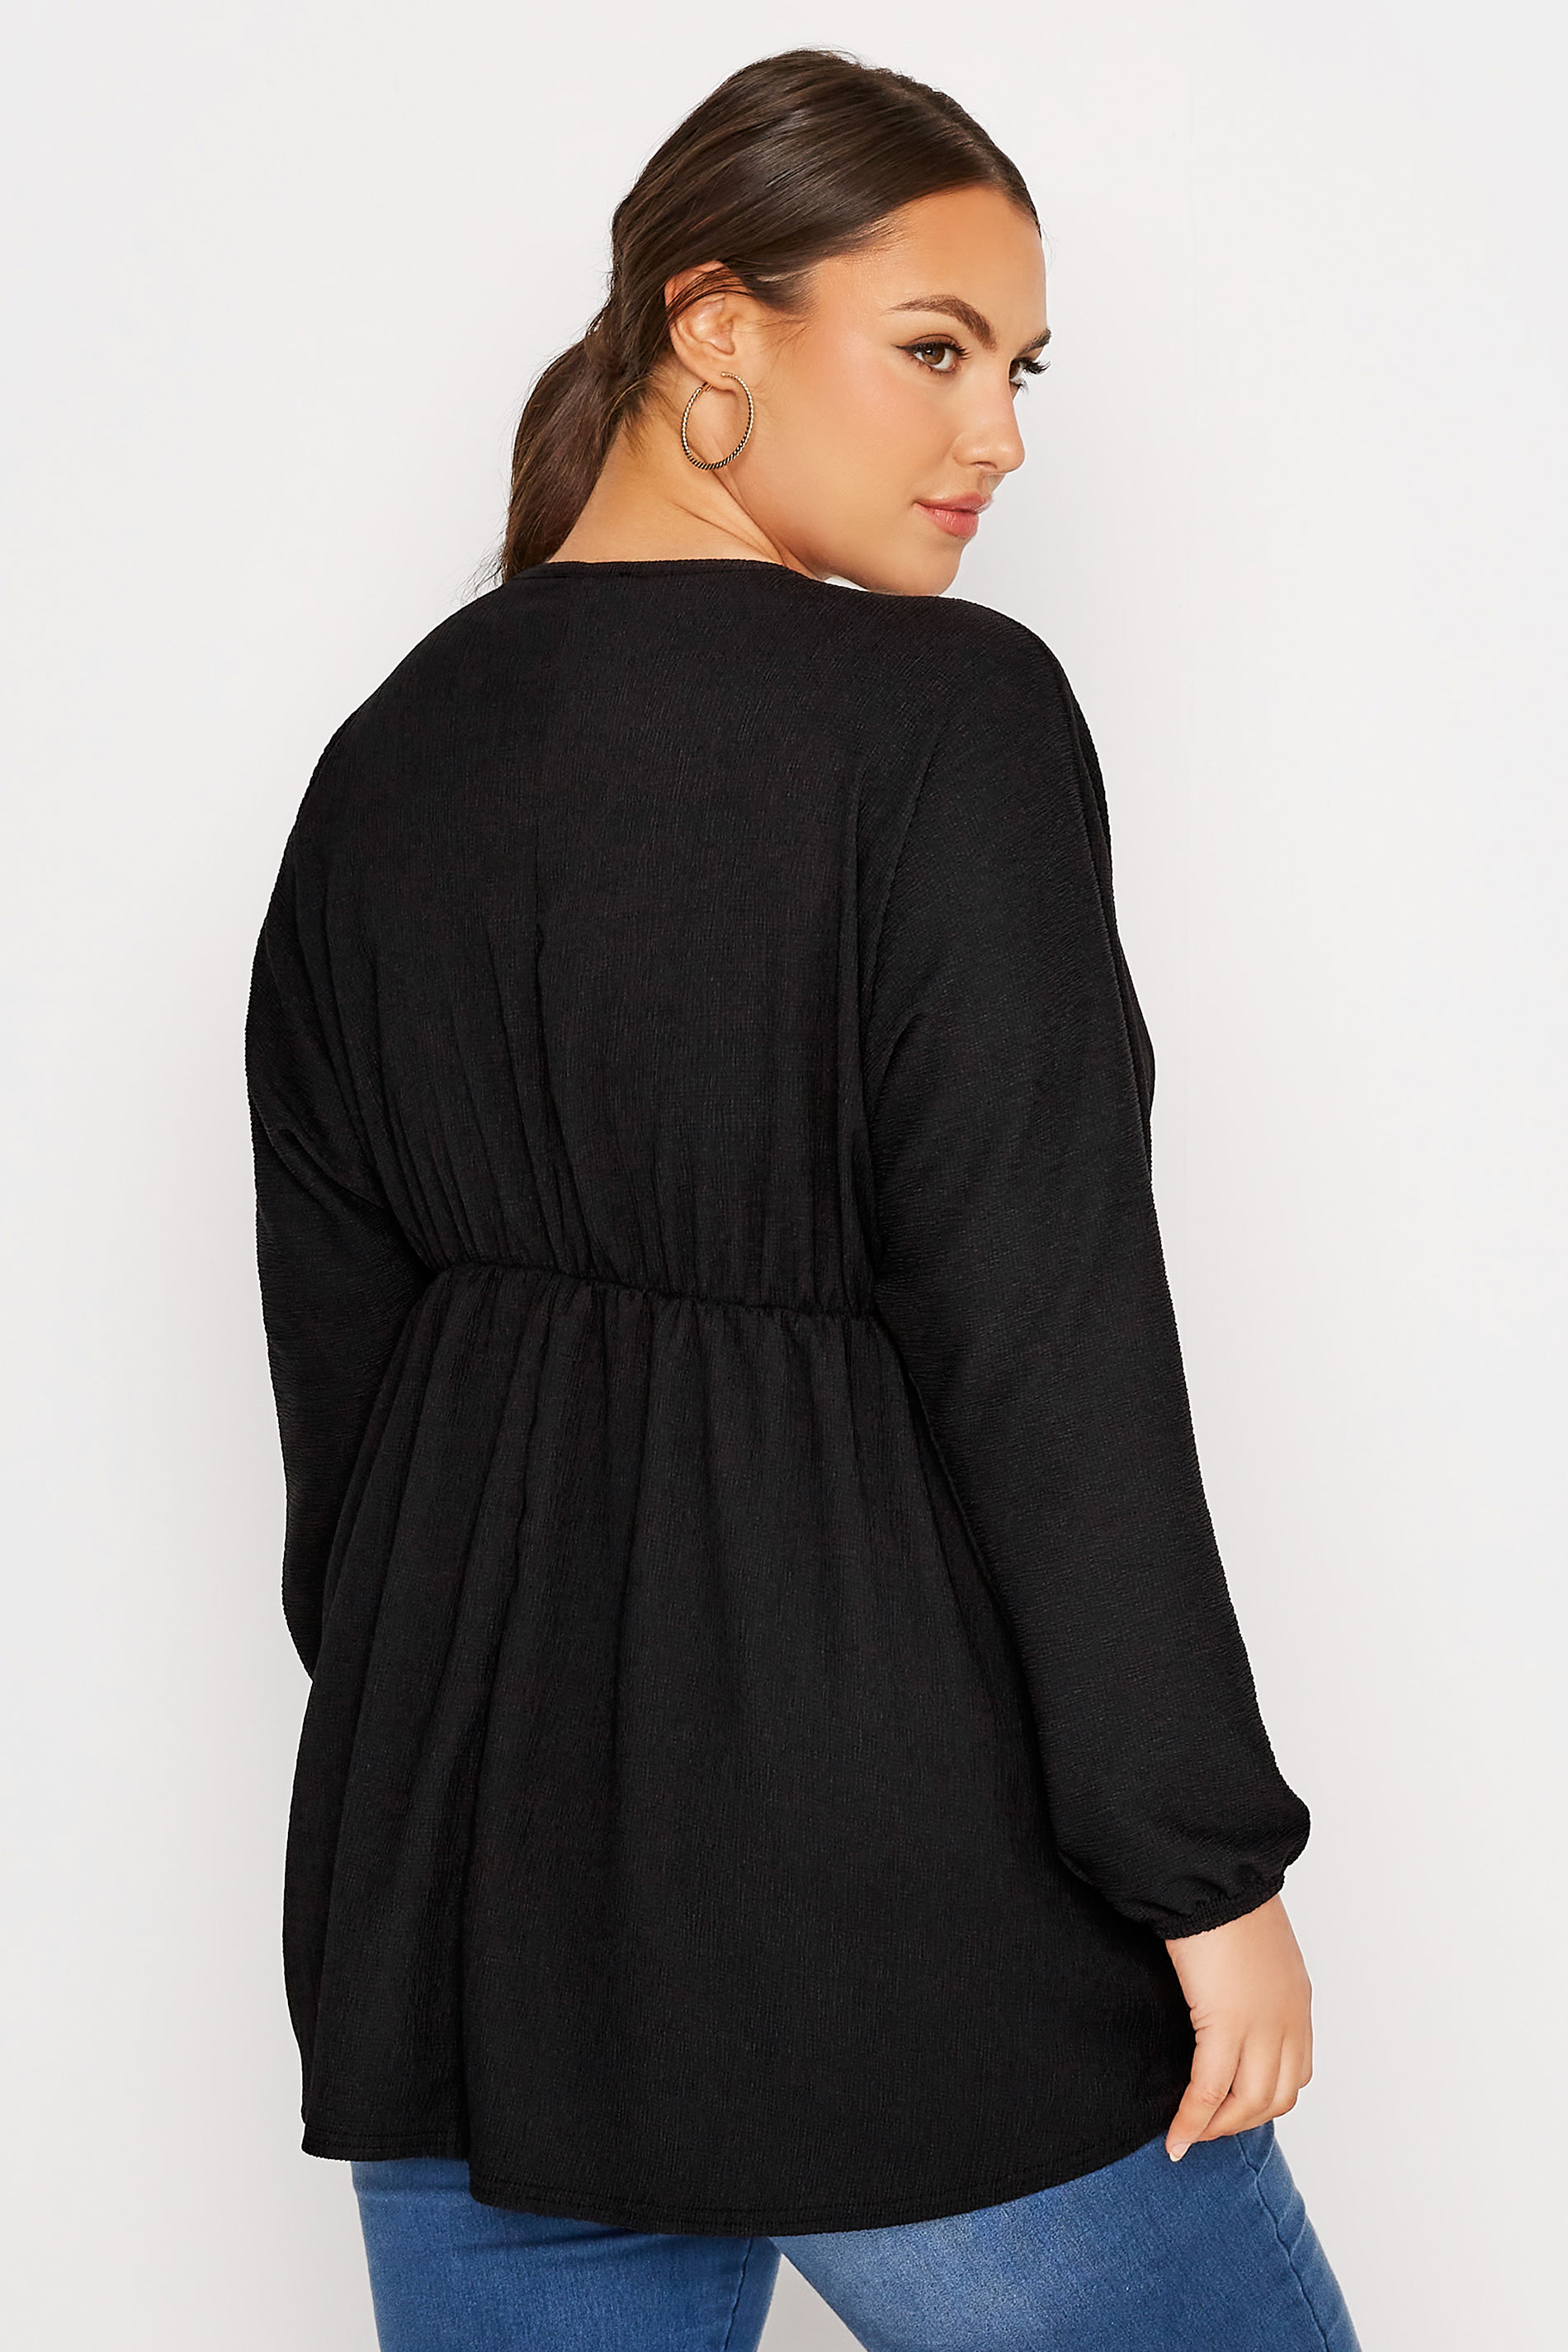 LIMITED COLLECTION Plus Size Black Crinkle Lace Up Peplum Blouse | Yours Clothing 3